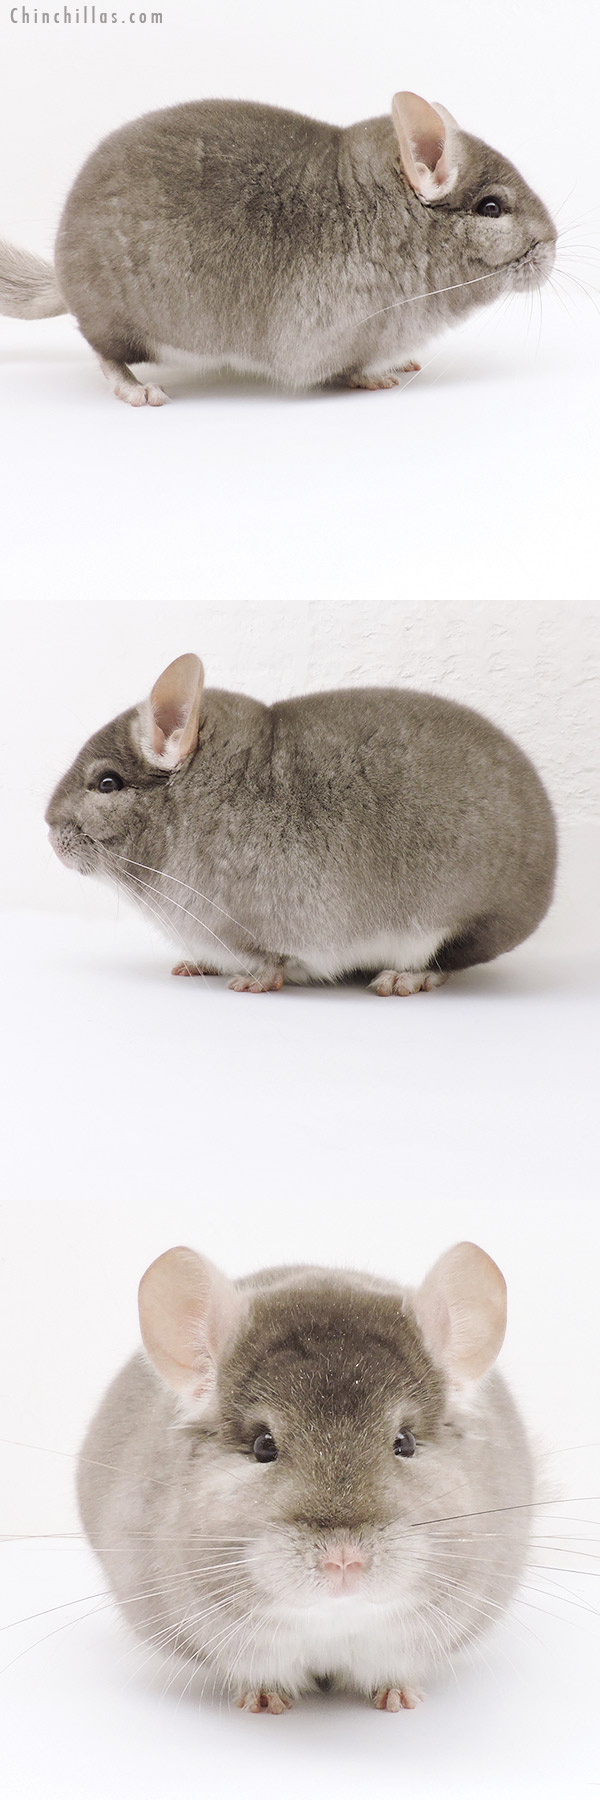 Chinchilla or related item offered for sale or export on Chinchillas.com - 19227 Blocky Herd Improvement Quality Beige Male Chinchilla